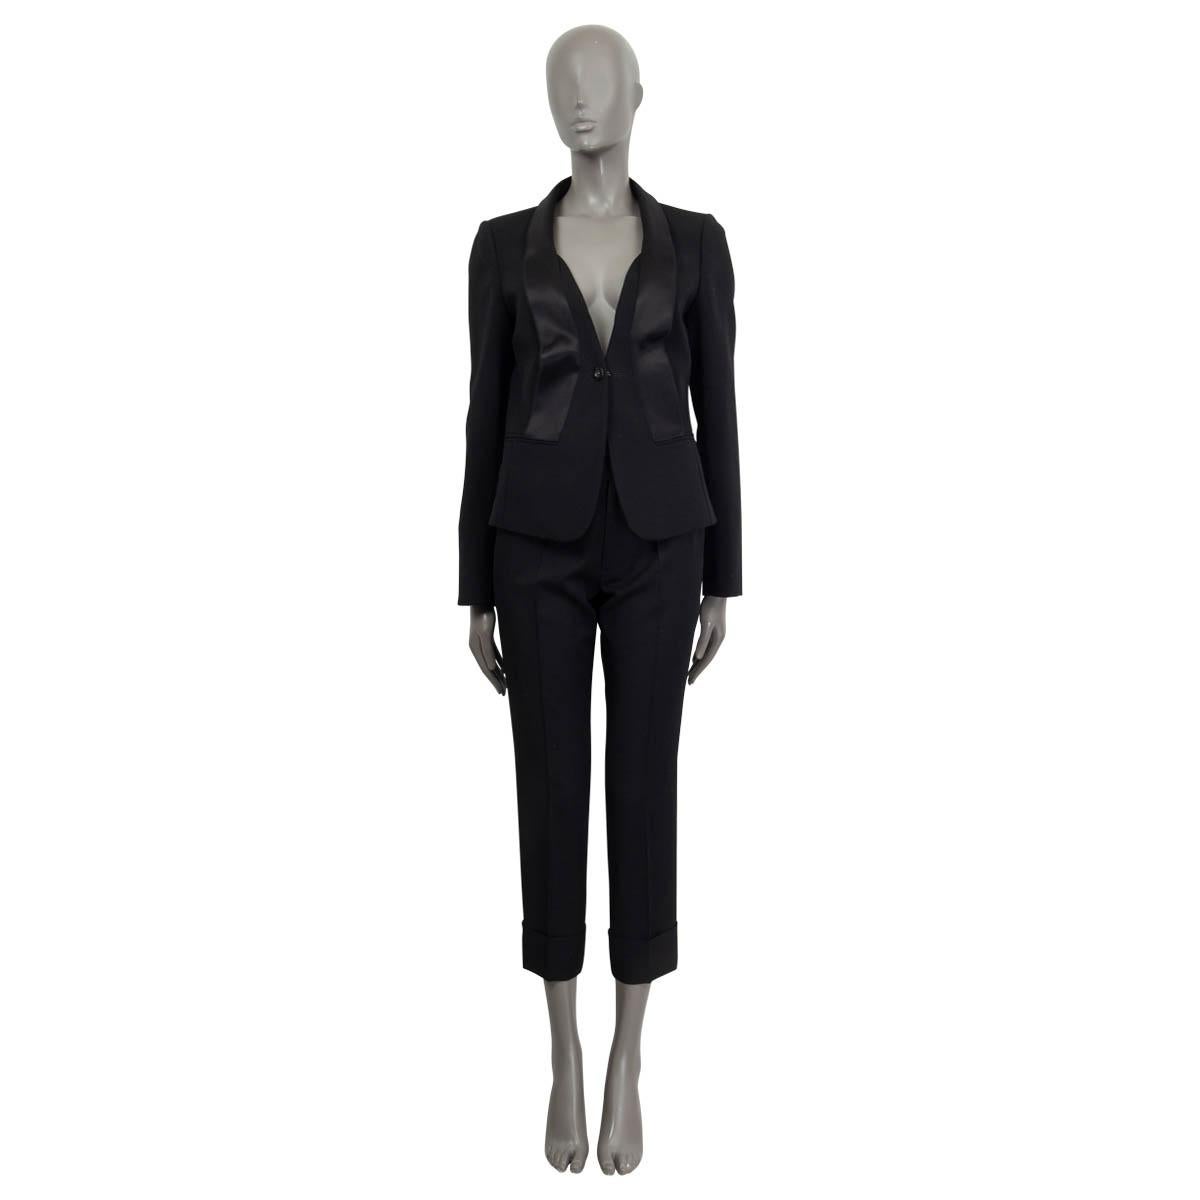 100% authentic Salvatore Ferragamo blazer in black wool (94%), spandex (5%) and nylon (1%). Features a black satin shawl collar and two faux slit pockets on the front. Opens with one button on the front. Lined in black silk (100%). Has been worn and